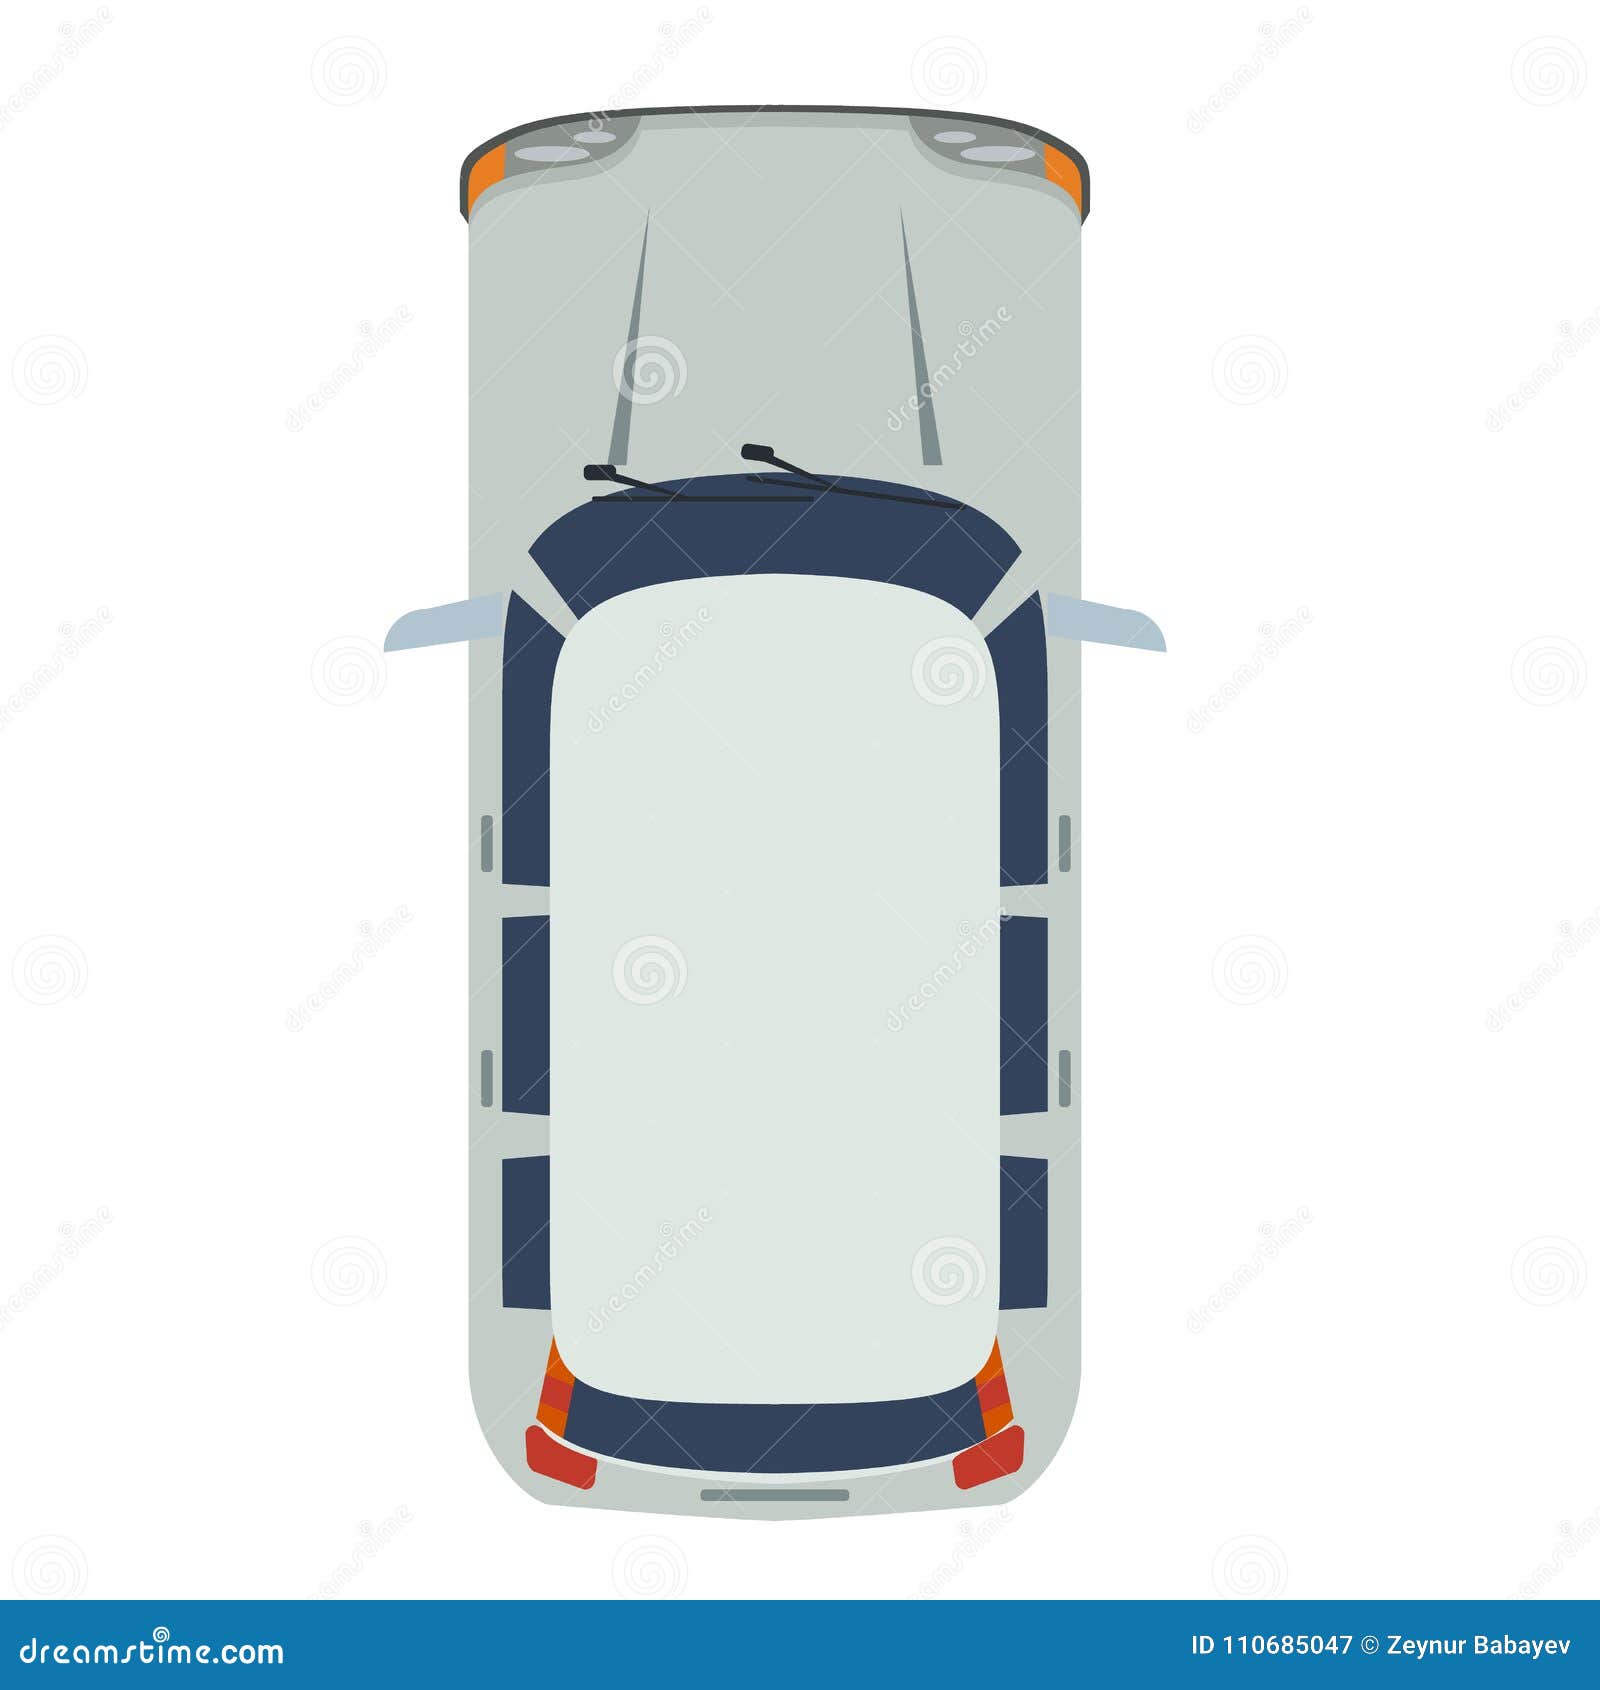 Hatchback Car Top View. Realistic and Flat Color Style Design Vector ...